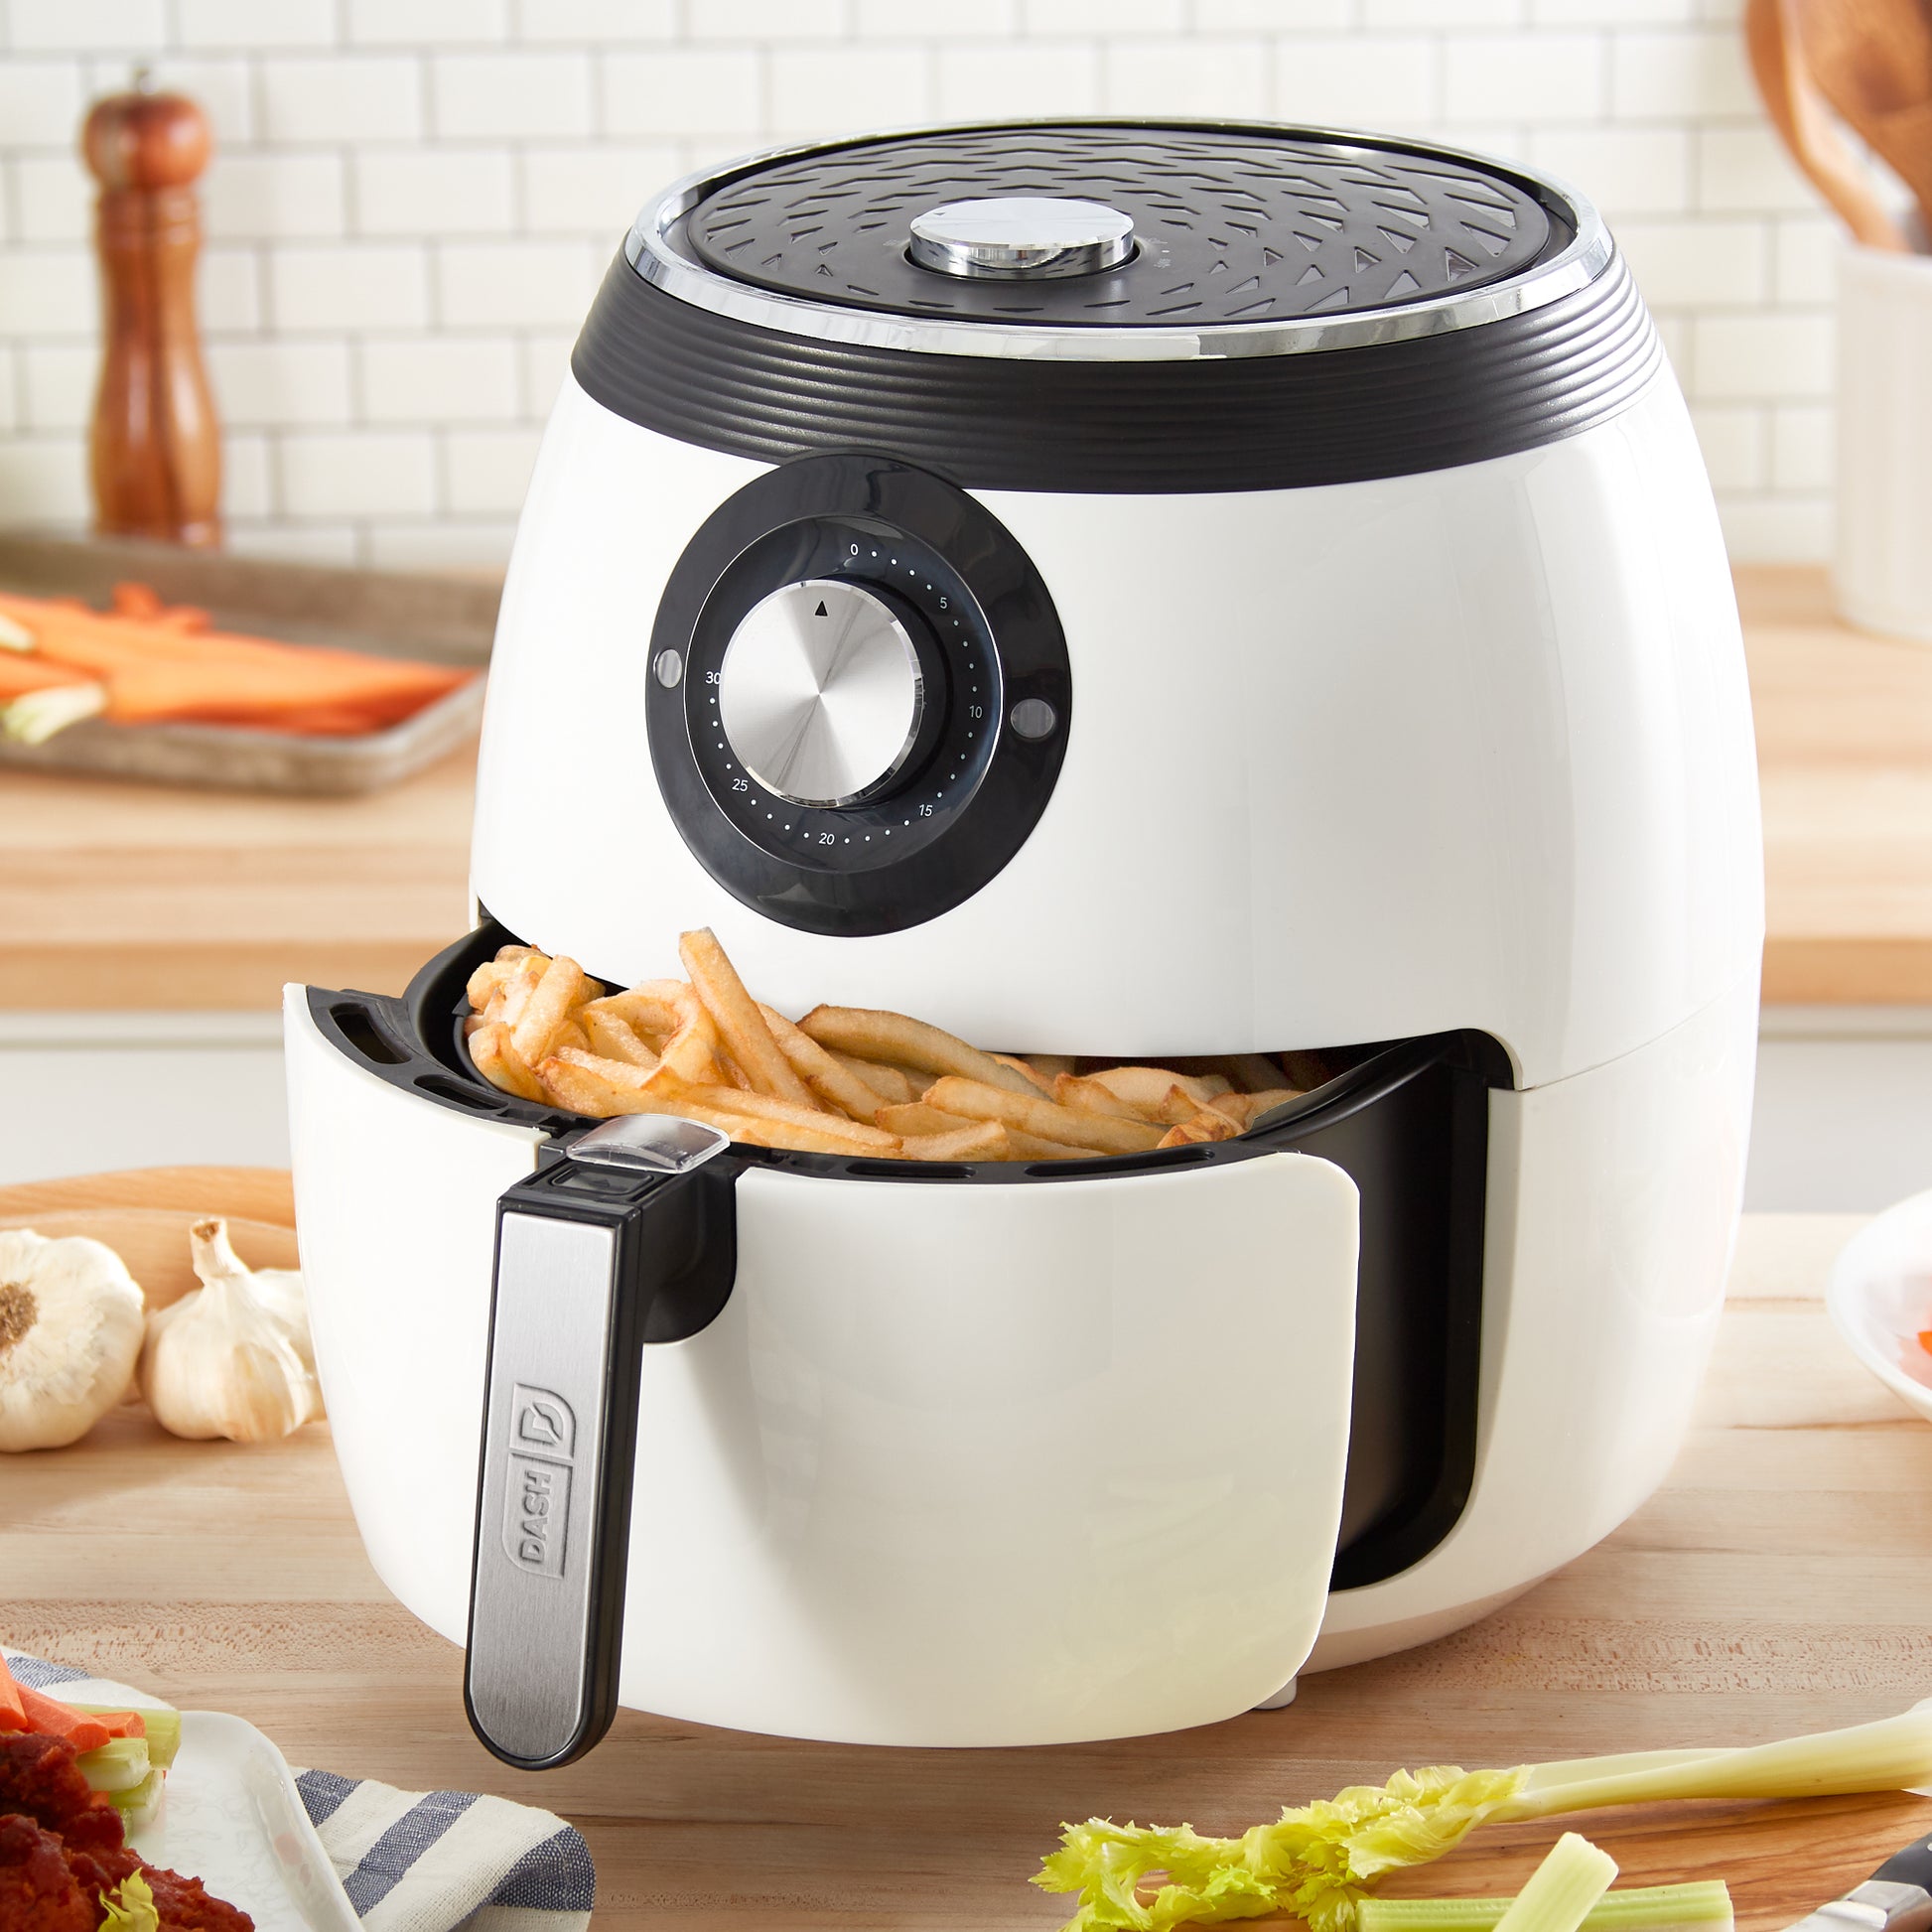 Dash Compact Electric Air Fryer Review